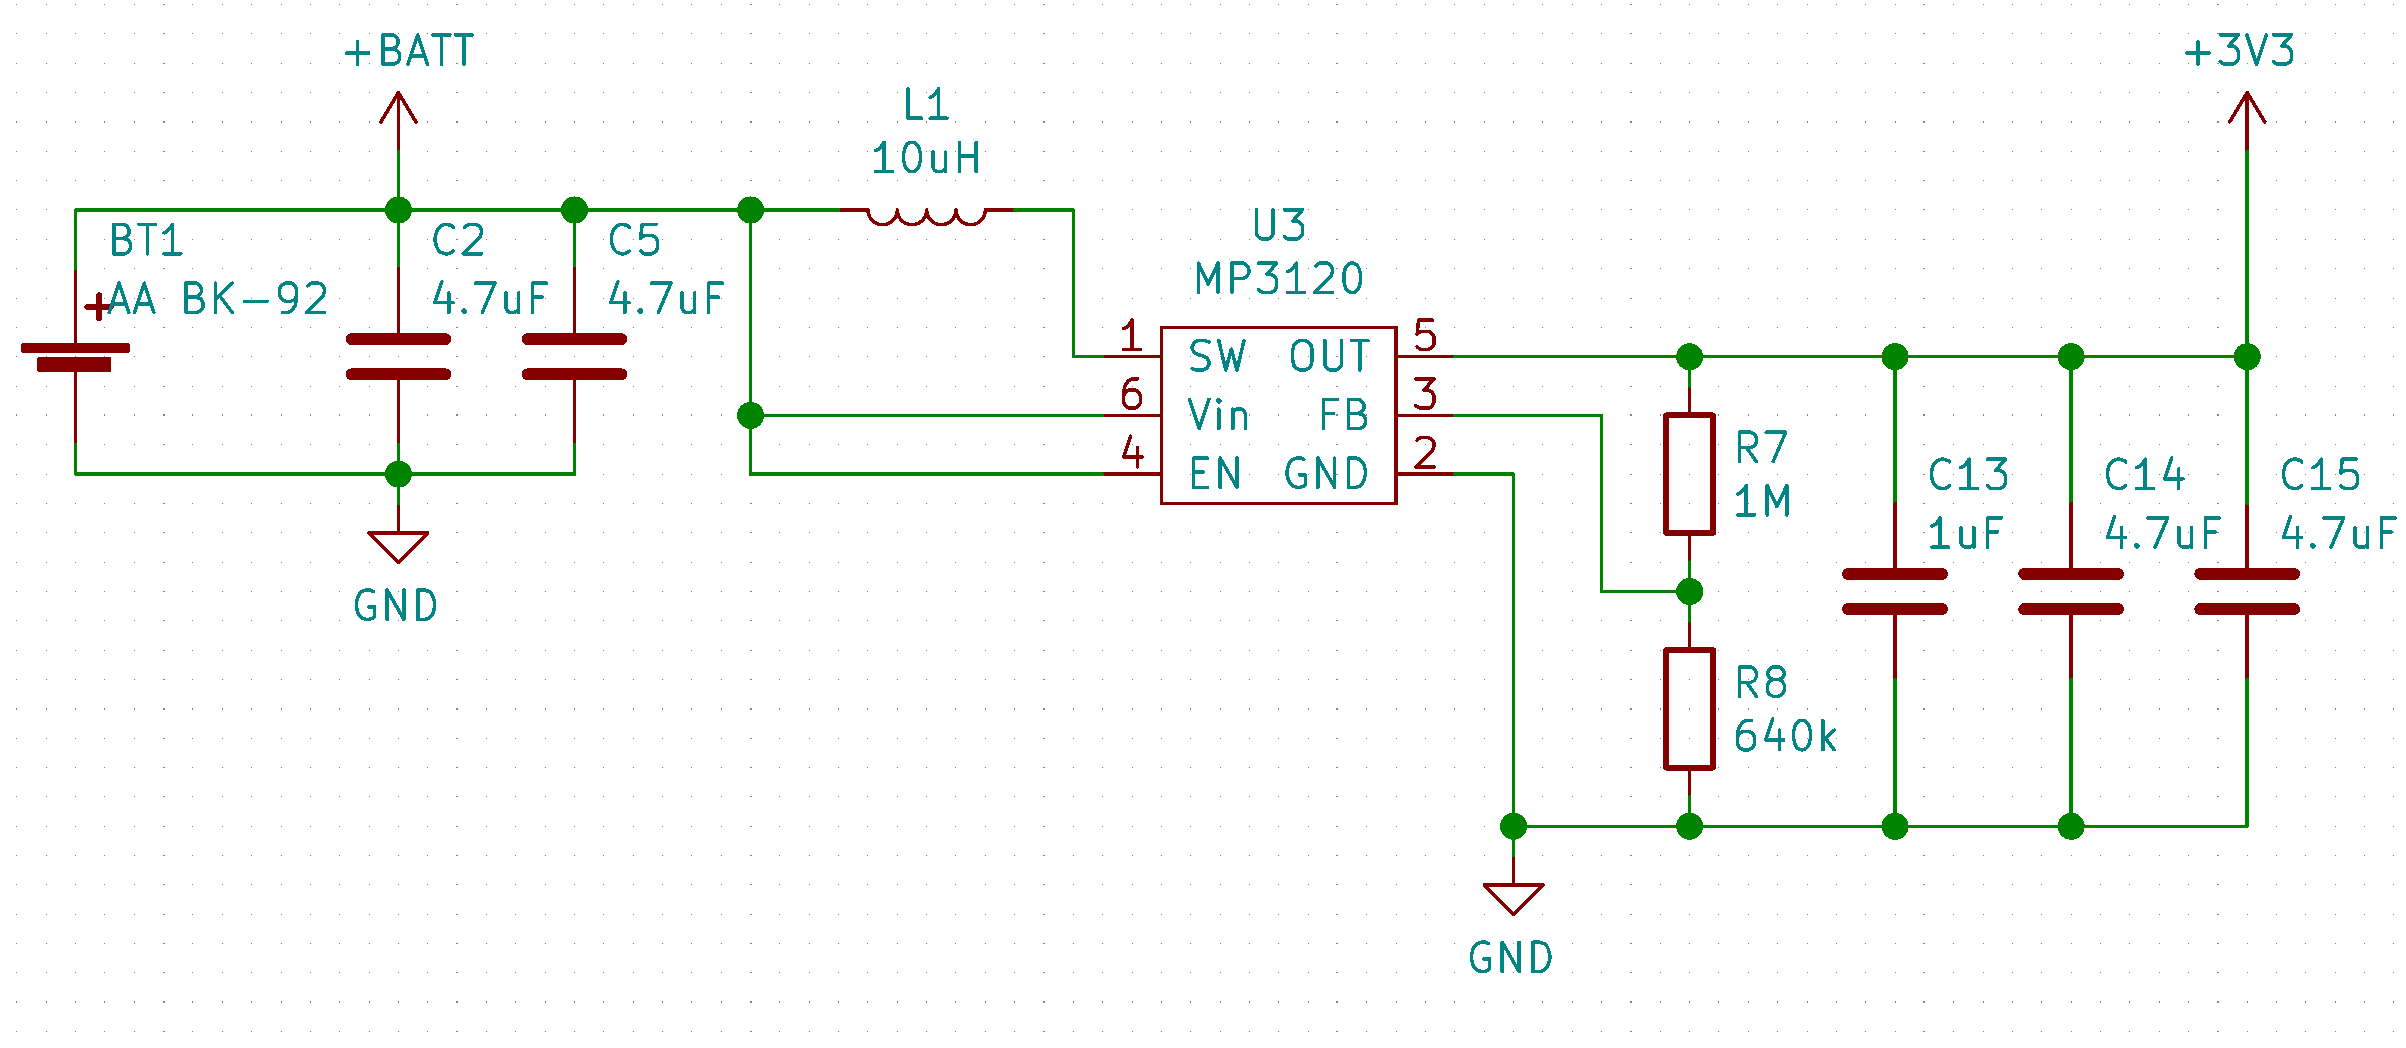 Schematic of the 3.3V supply